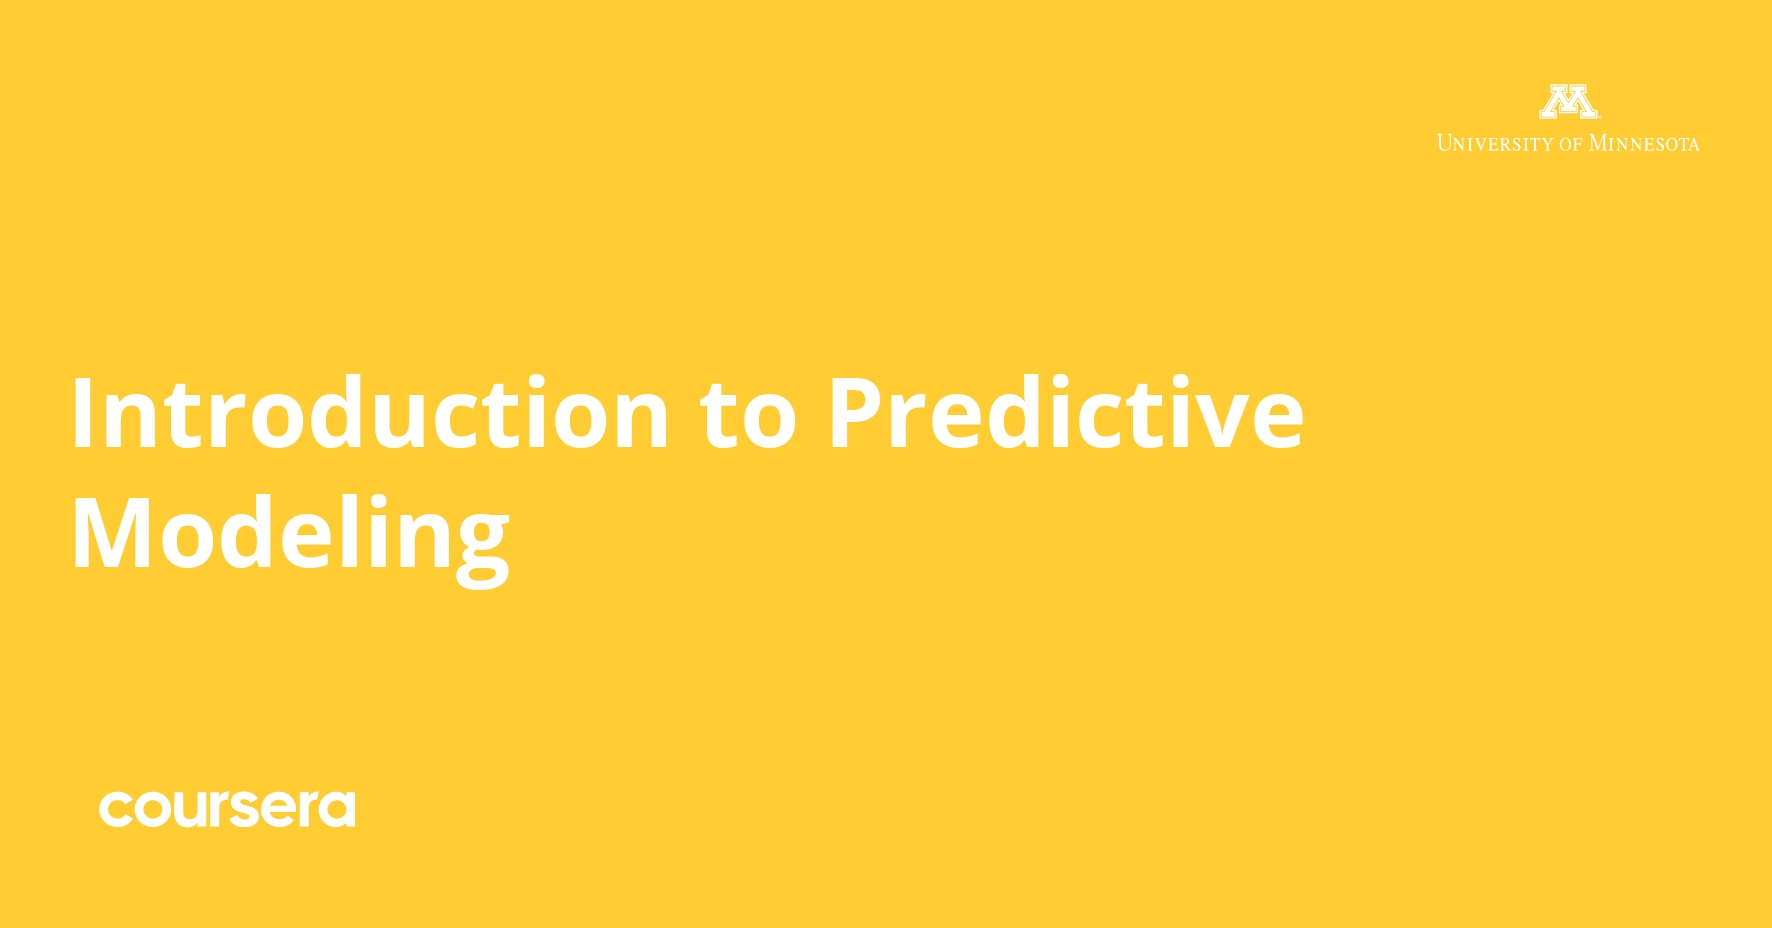 Introduction to Predictive Modeling